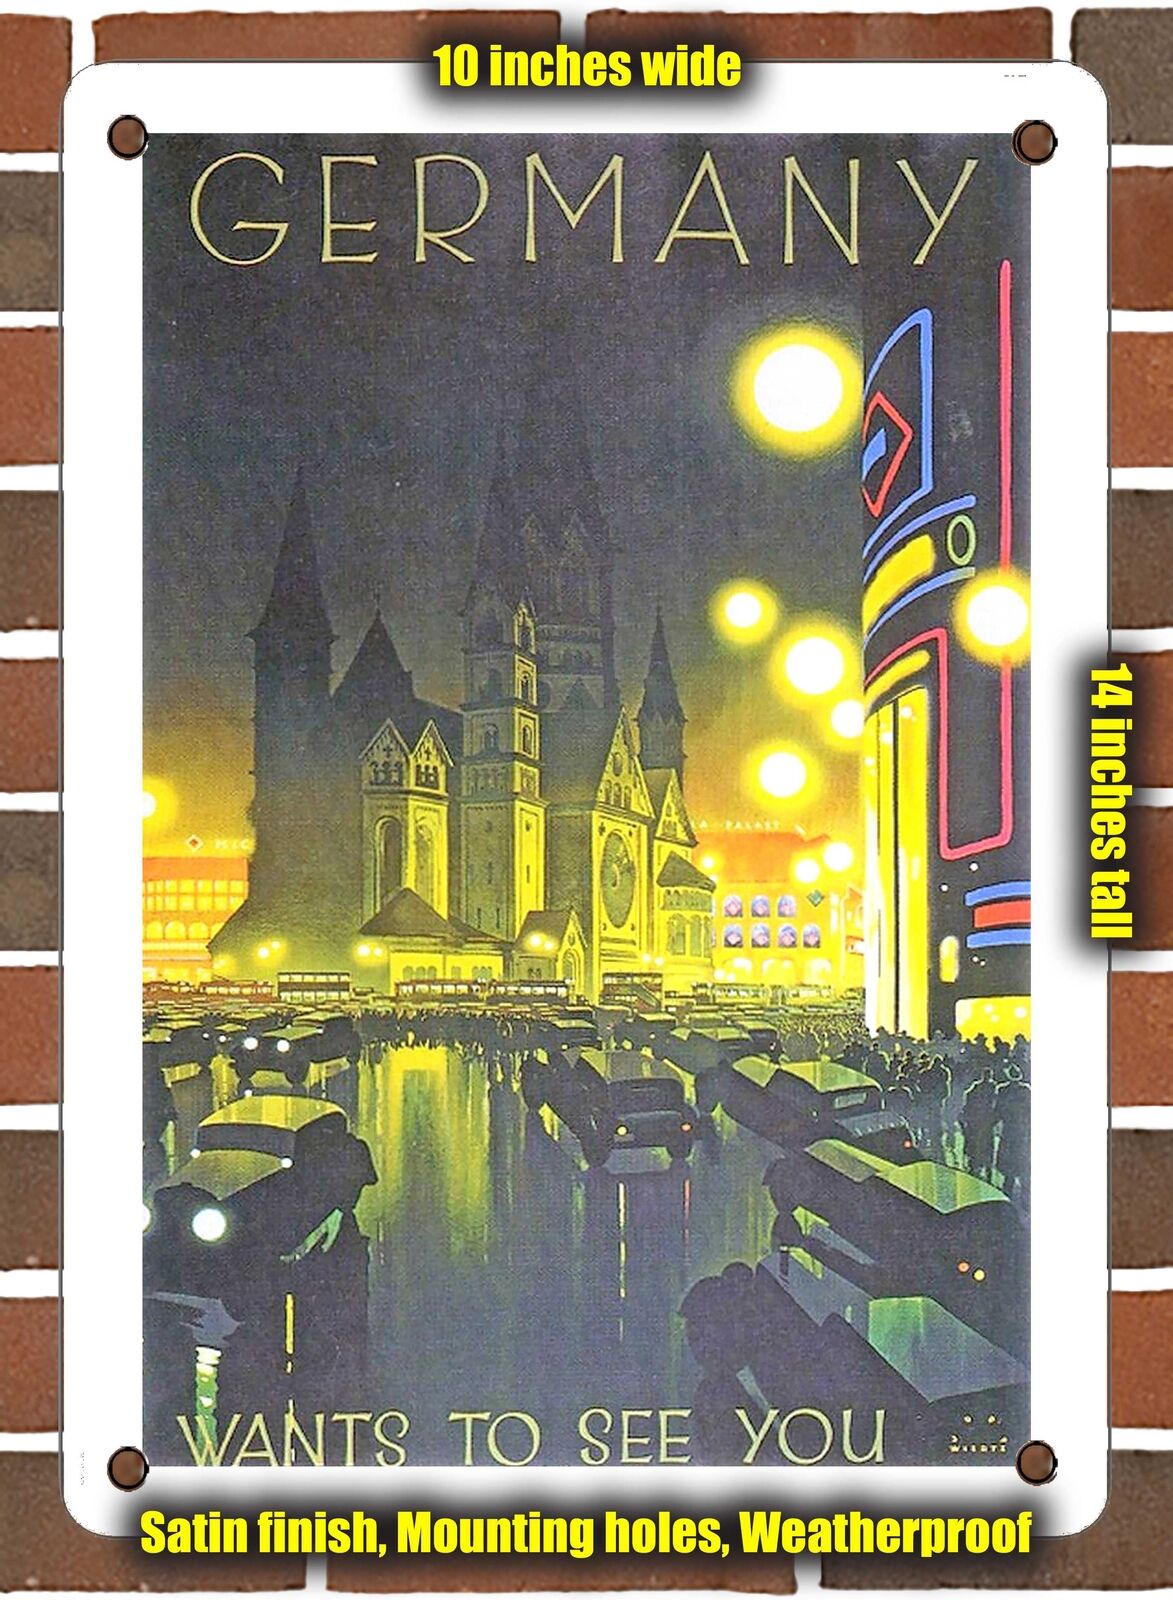 METAL SIGN - 1925 Germany Wants to See You - 10x14 Inches 2